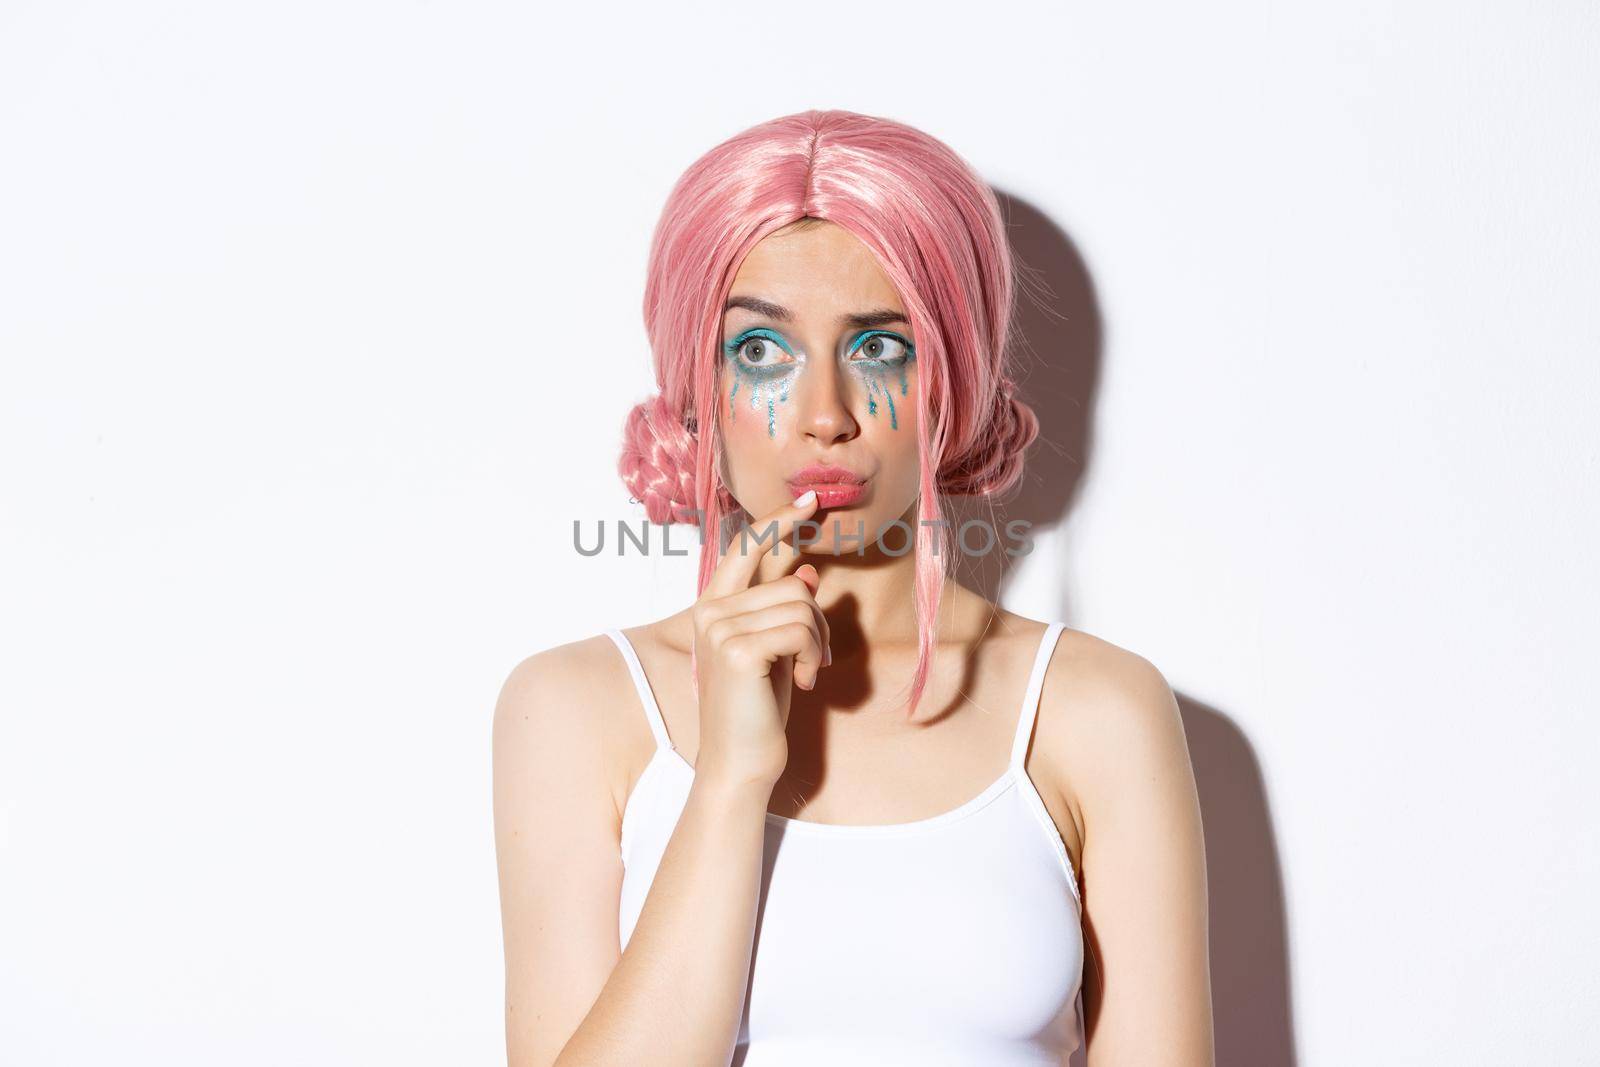 Close-up of concerned cute girl in pink party wig, looking left and thinking, standing over white background in halloween costume.